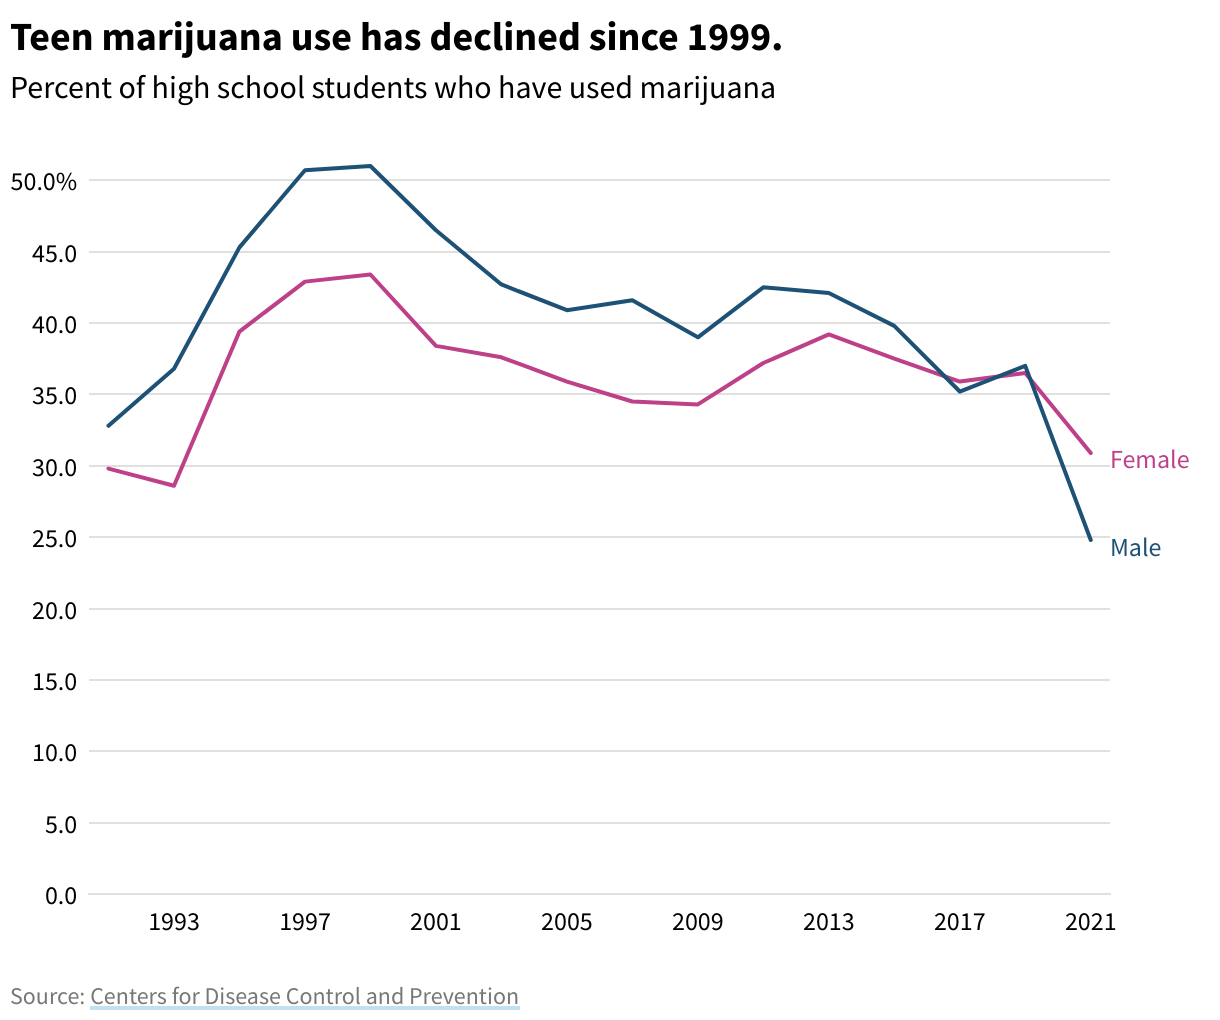 Line chart showing teen use of marijuana by sex over time, declining for males and females since 1999.